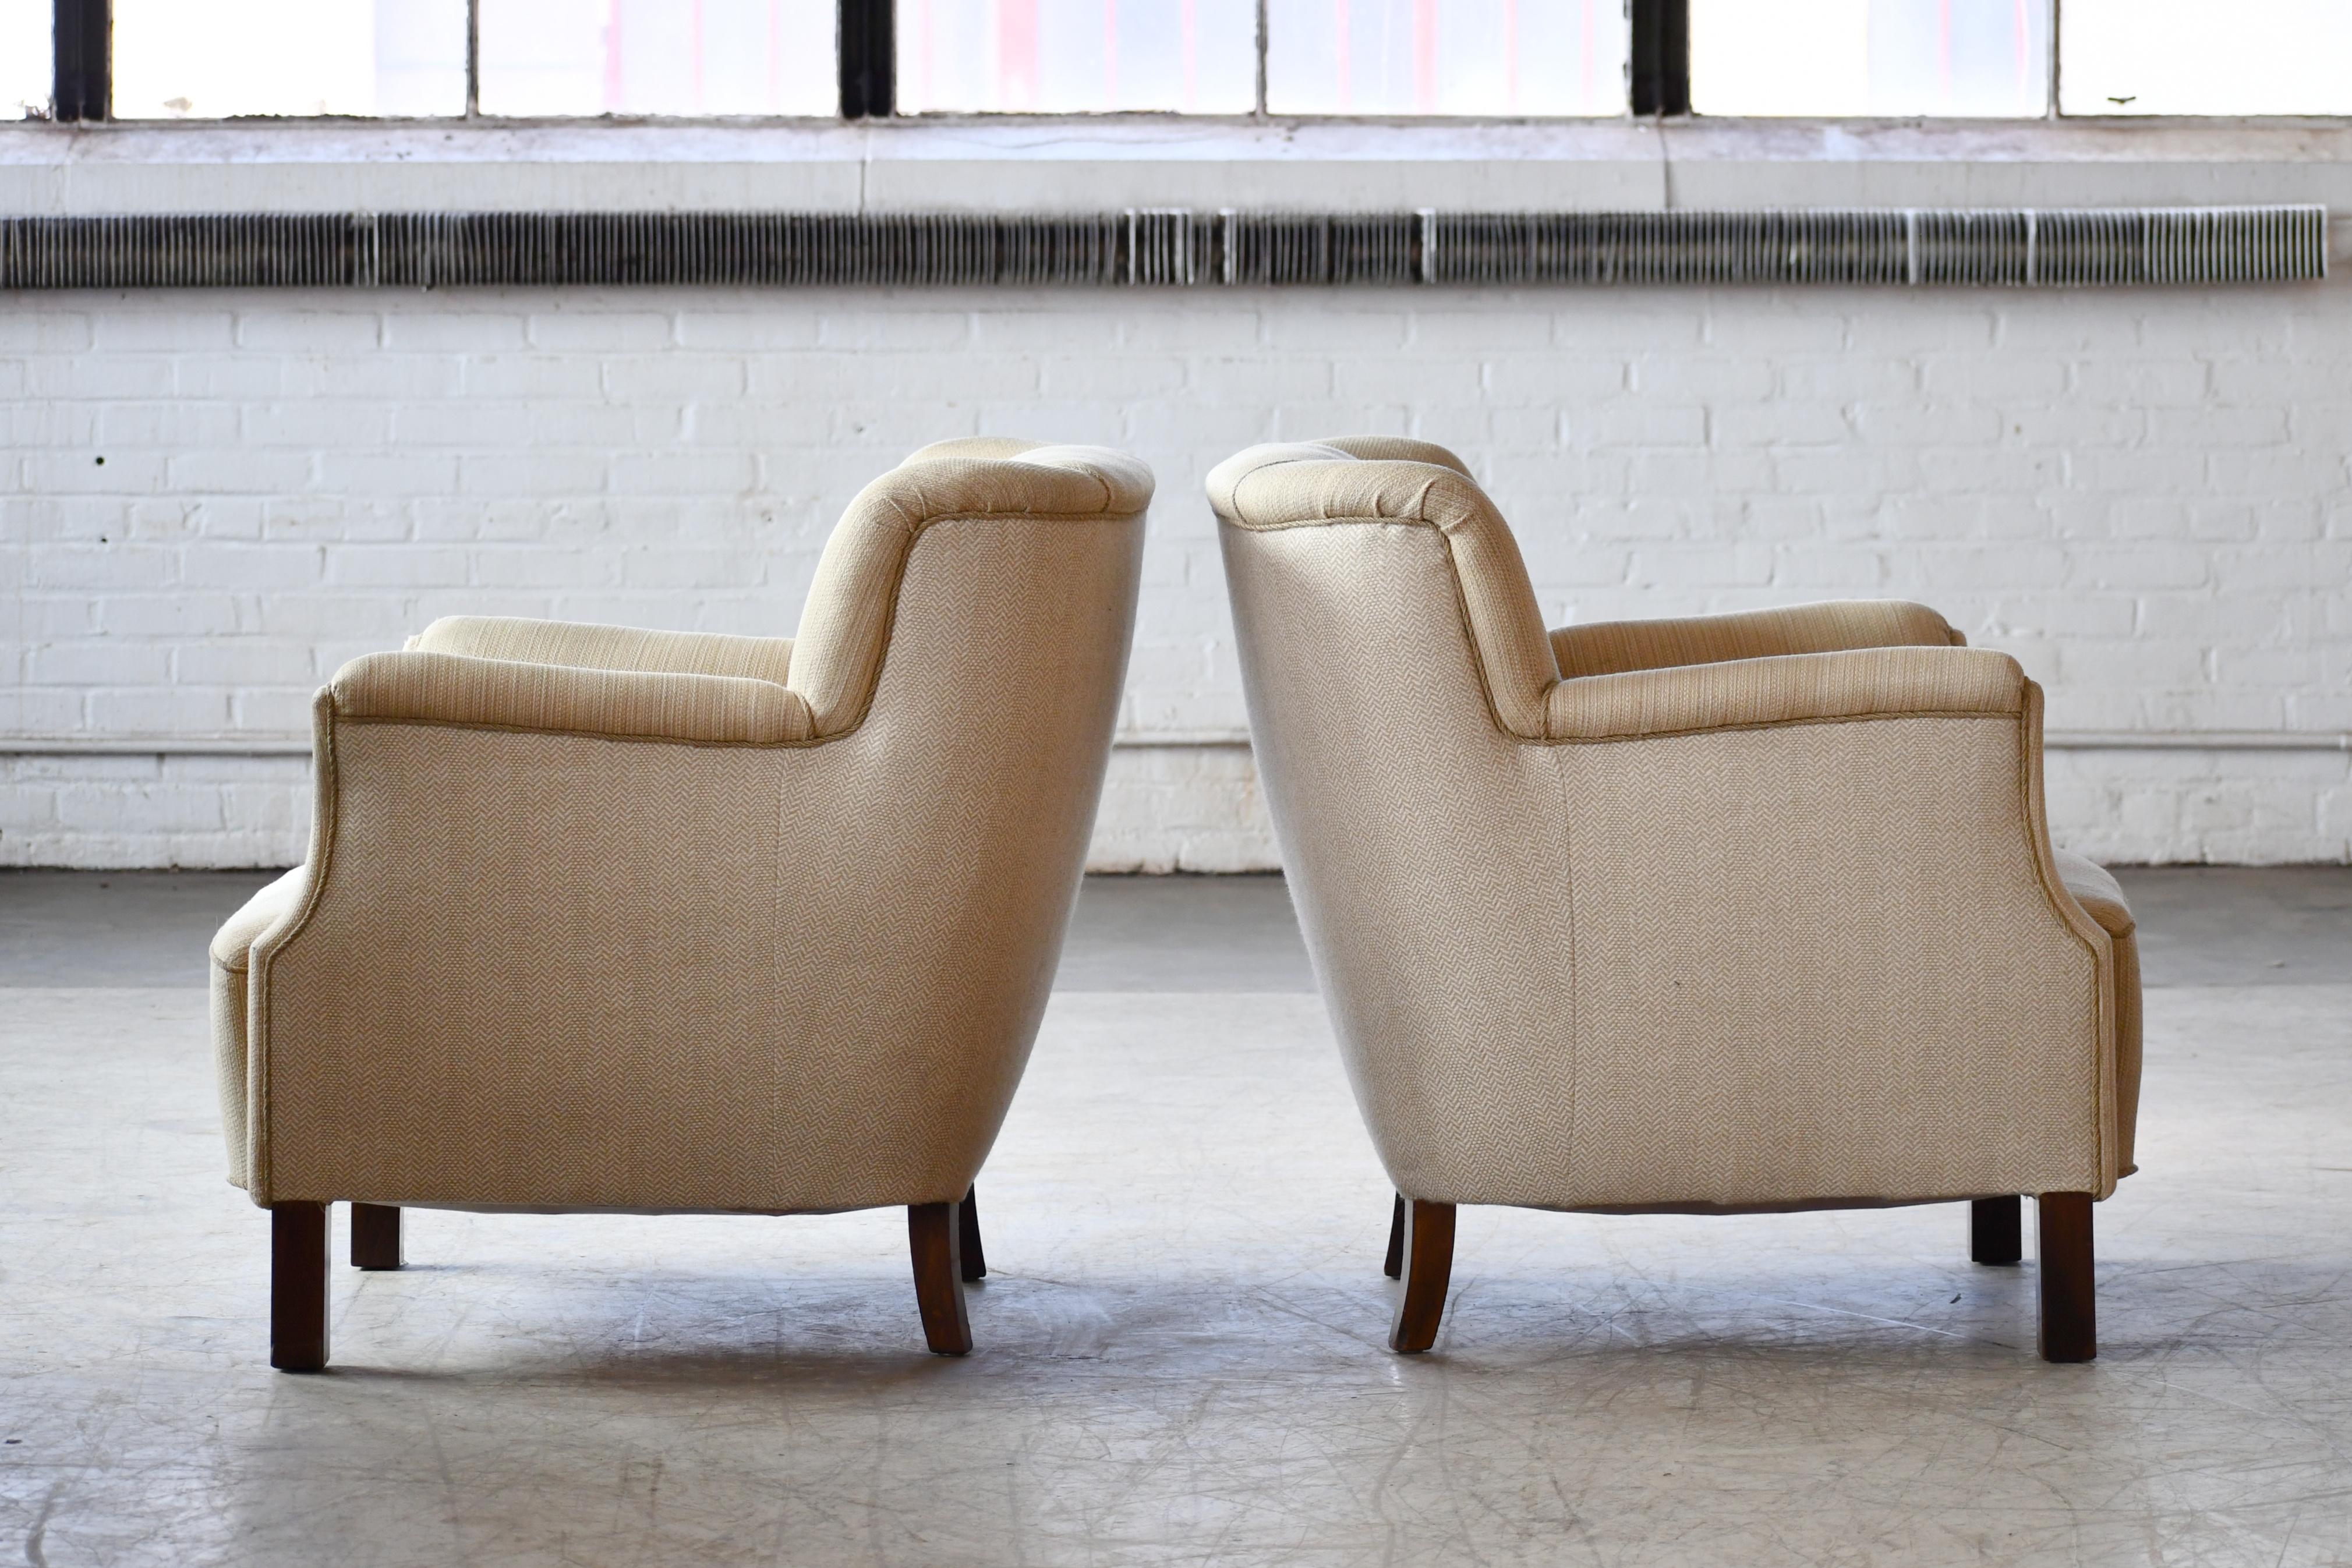 Classic Danish lounge chairs ca. 1940's and very much in the style and tradition of Fritz Hansen. The front legs are very much in the design and spirit of Fritz Hansen. Hansen liked square simple legs like seen on this pair. Coil springs in seat and